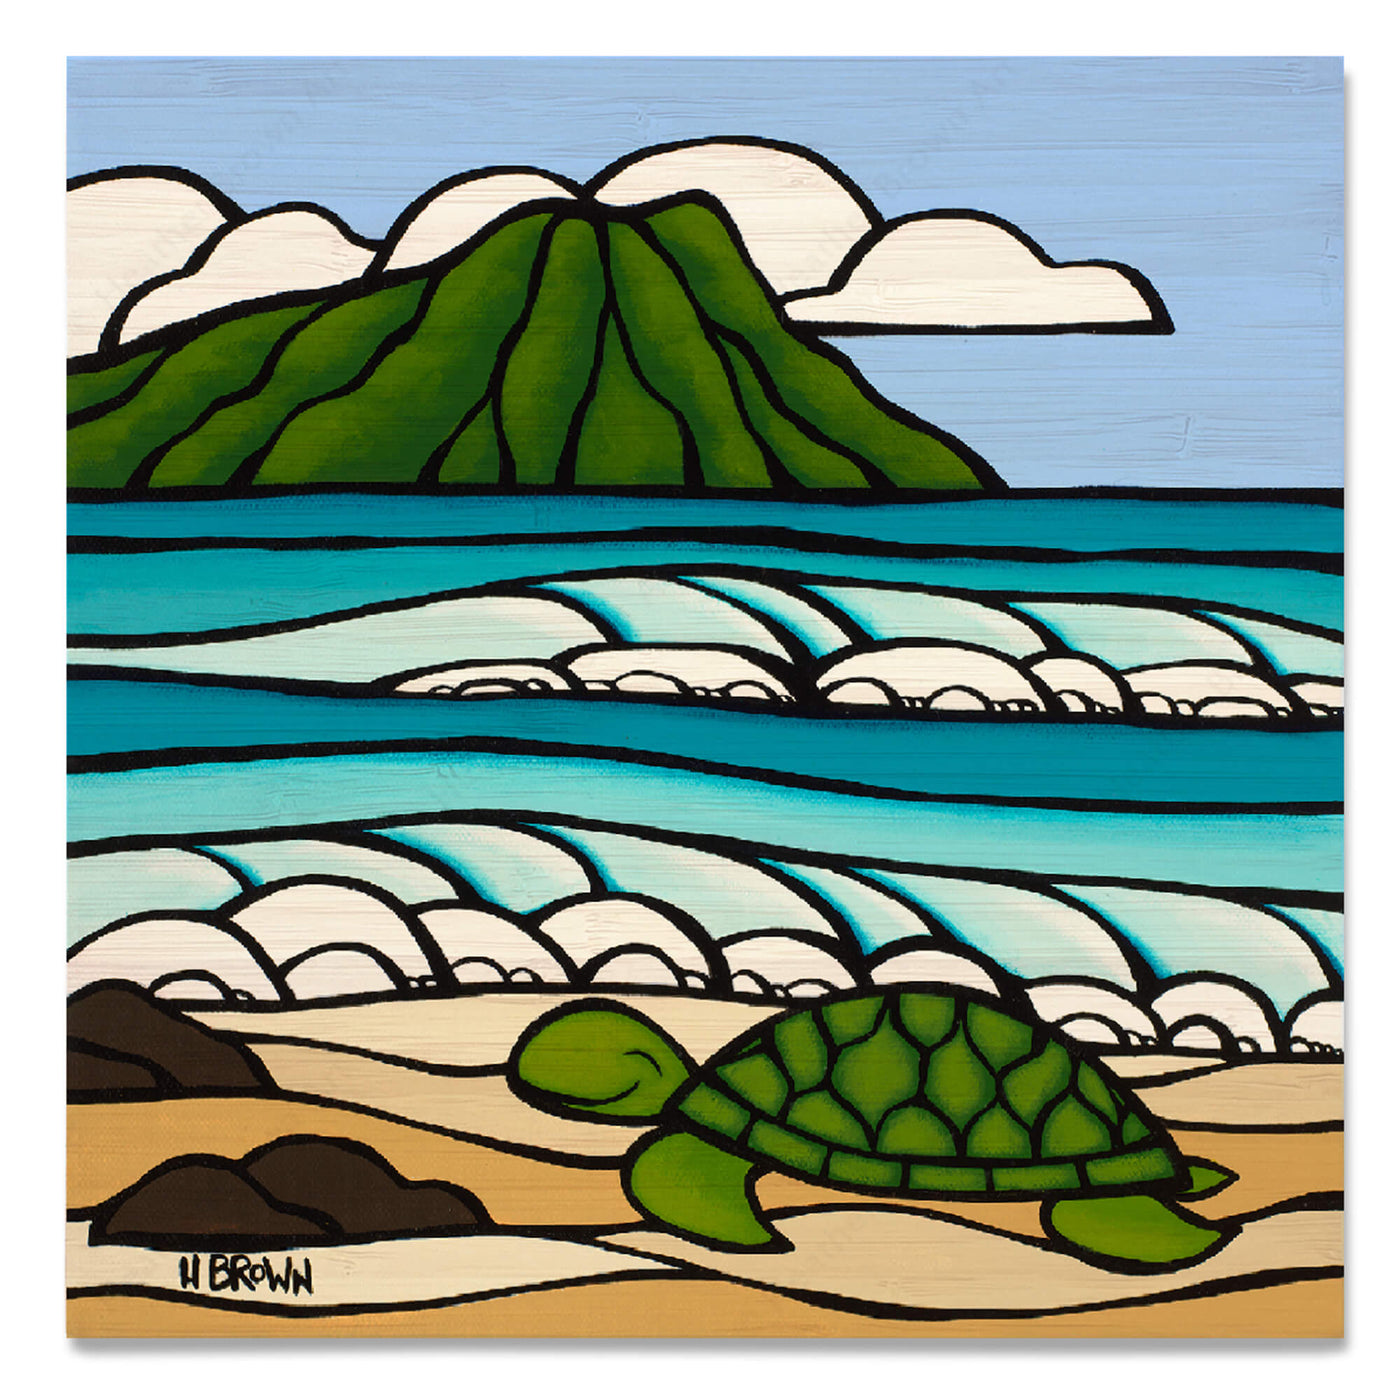 A bamboo art print featuring a smiling turtle with some rolling waves and the famous Diamond Head by Hawaii surf artist Heather brown